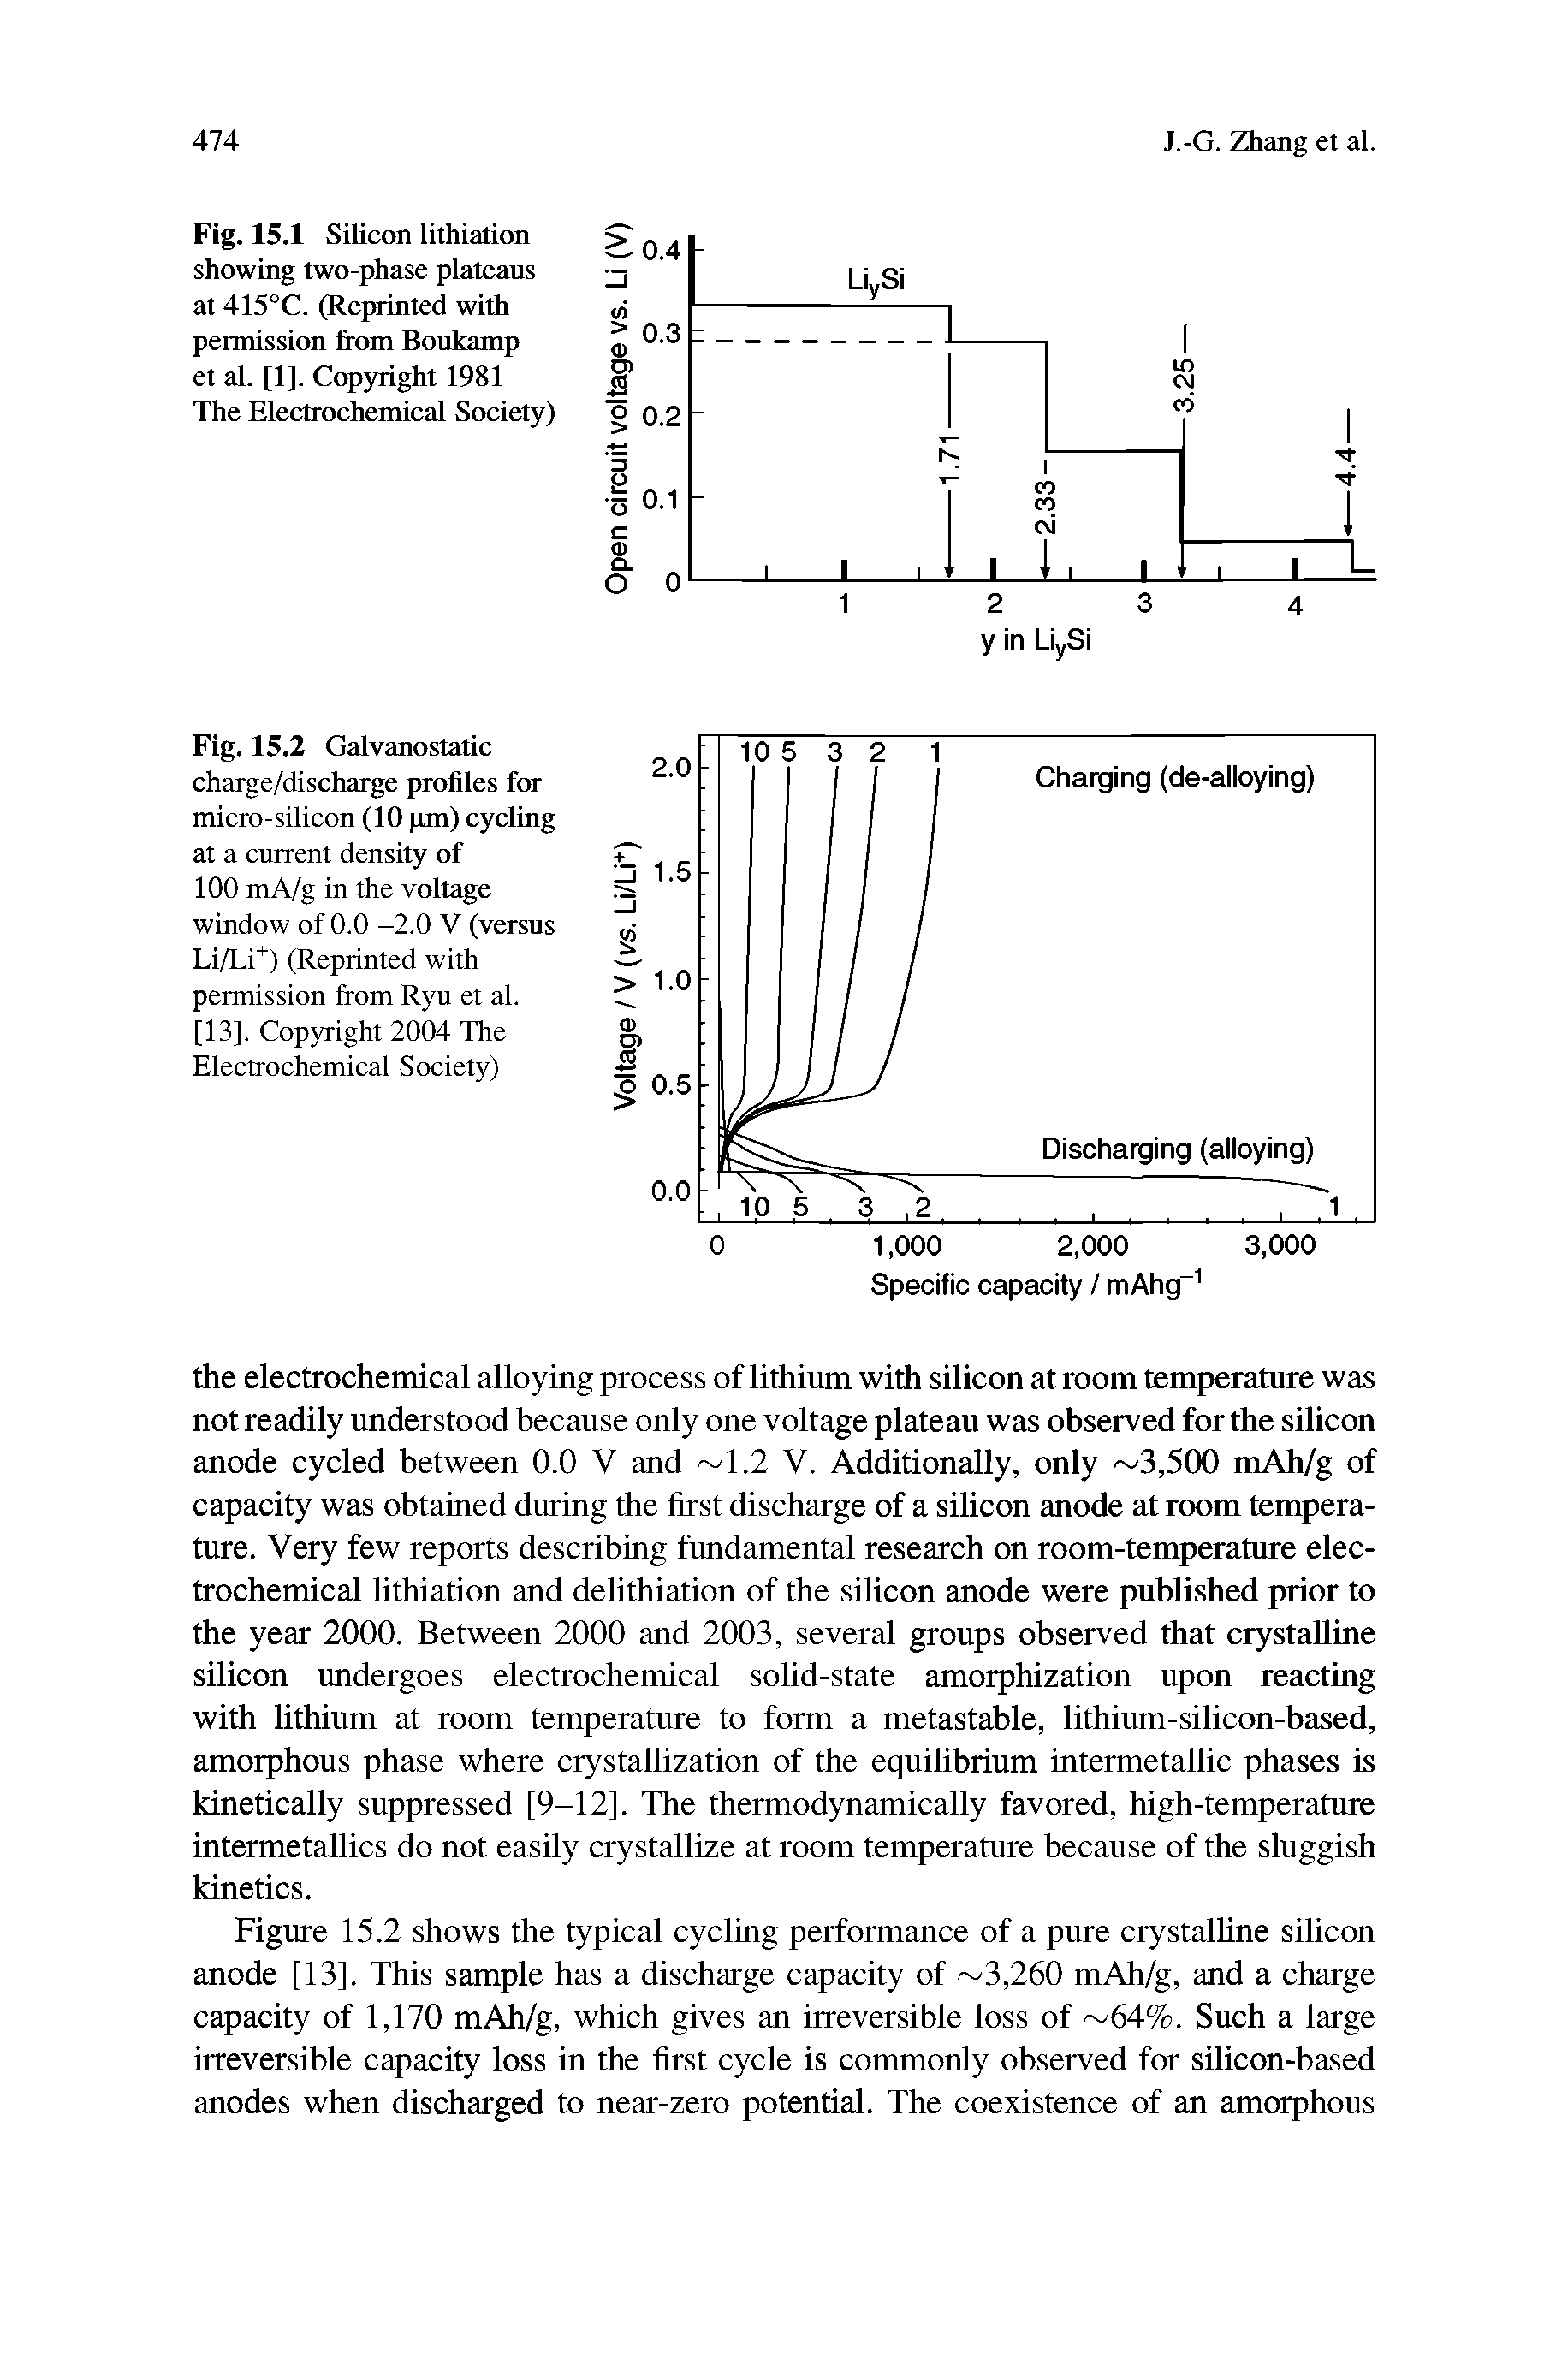 Fig. 15.1 Silicon lithiation showing two-phase plateaus at 415°C. (Reprinted with permission from Boukamp et al. [1], Copyright 1981 The Electrochemical Society)...